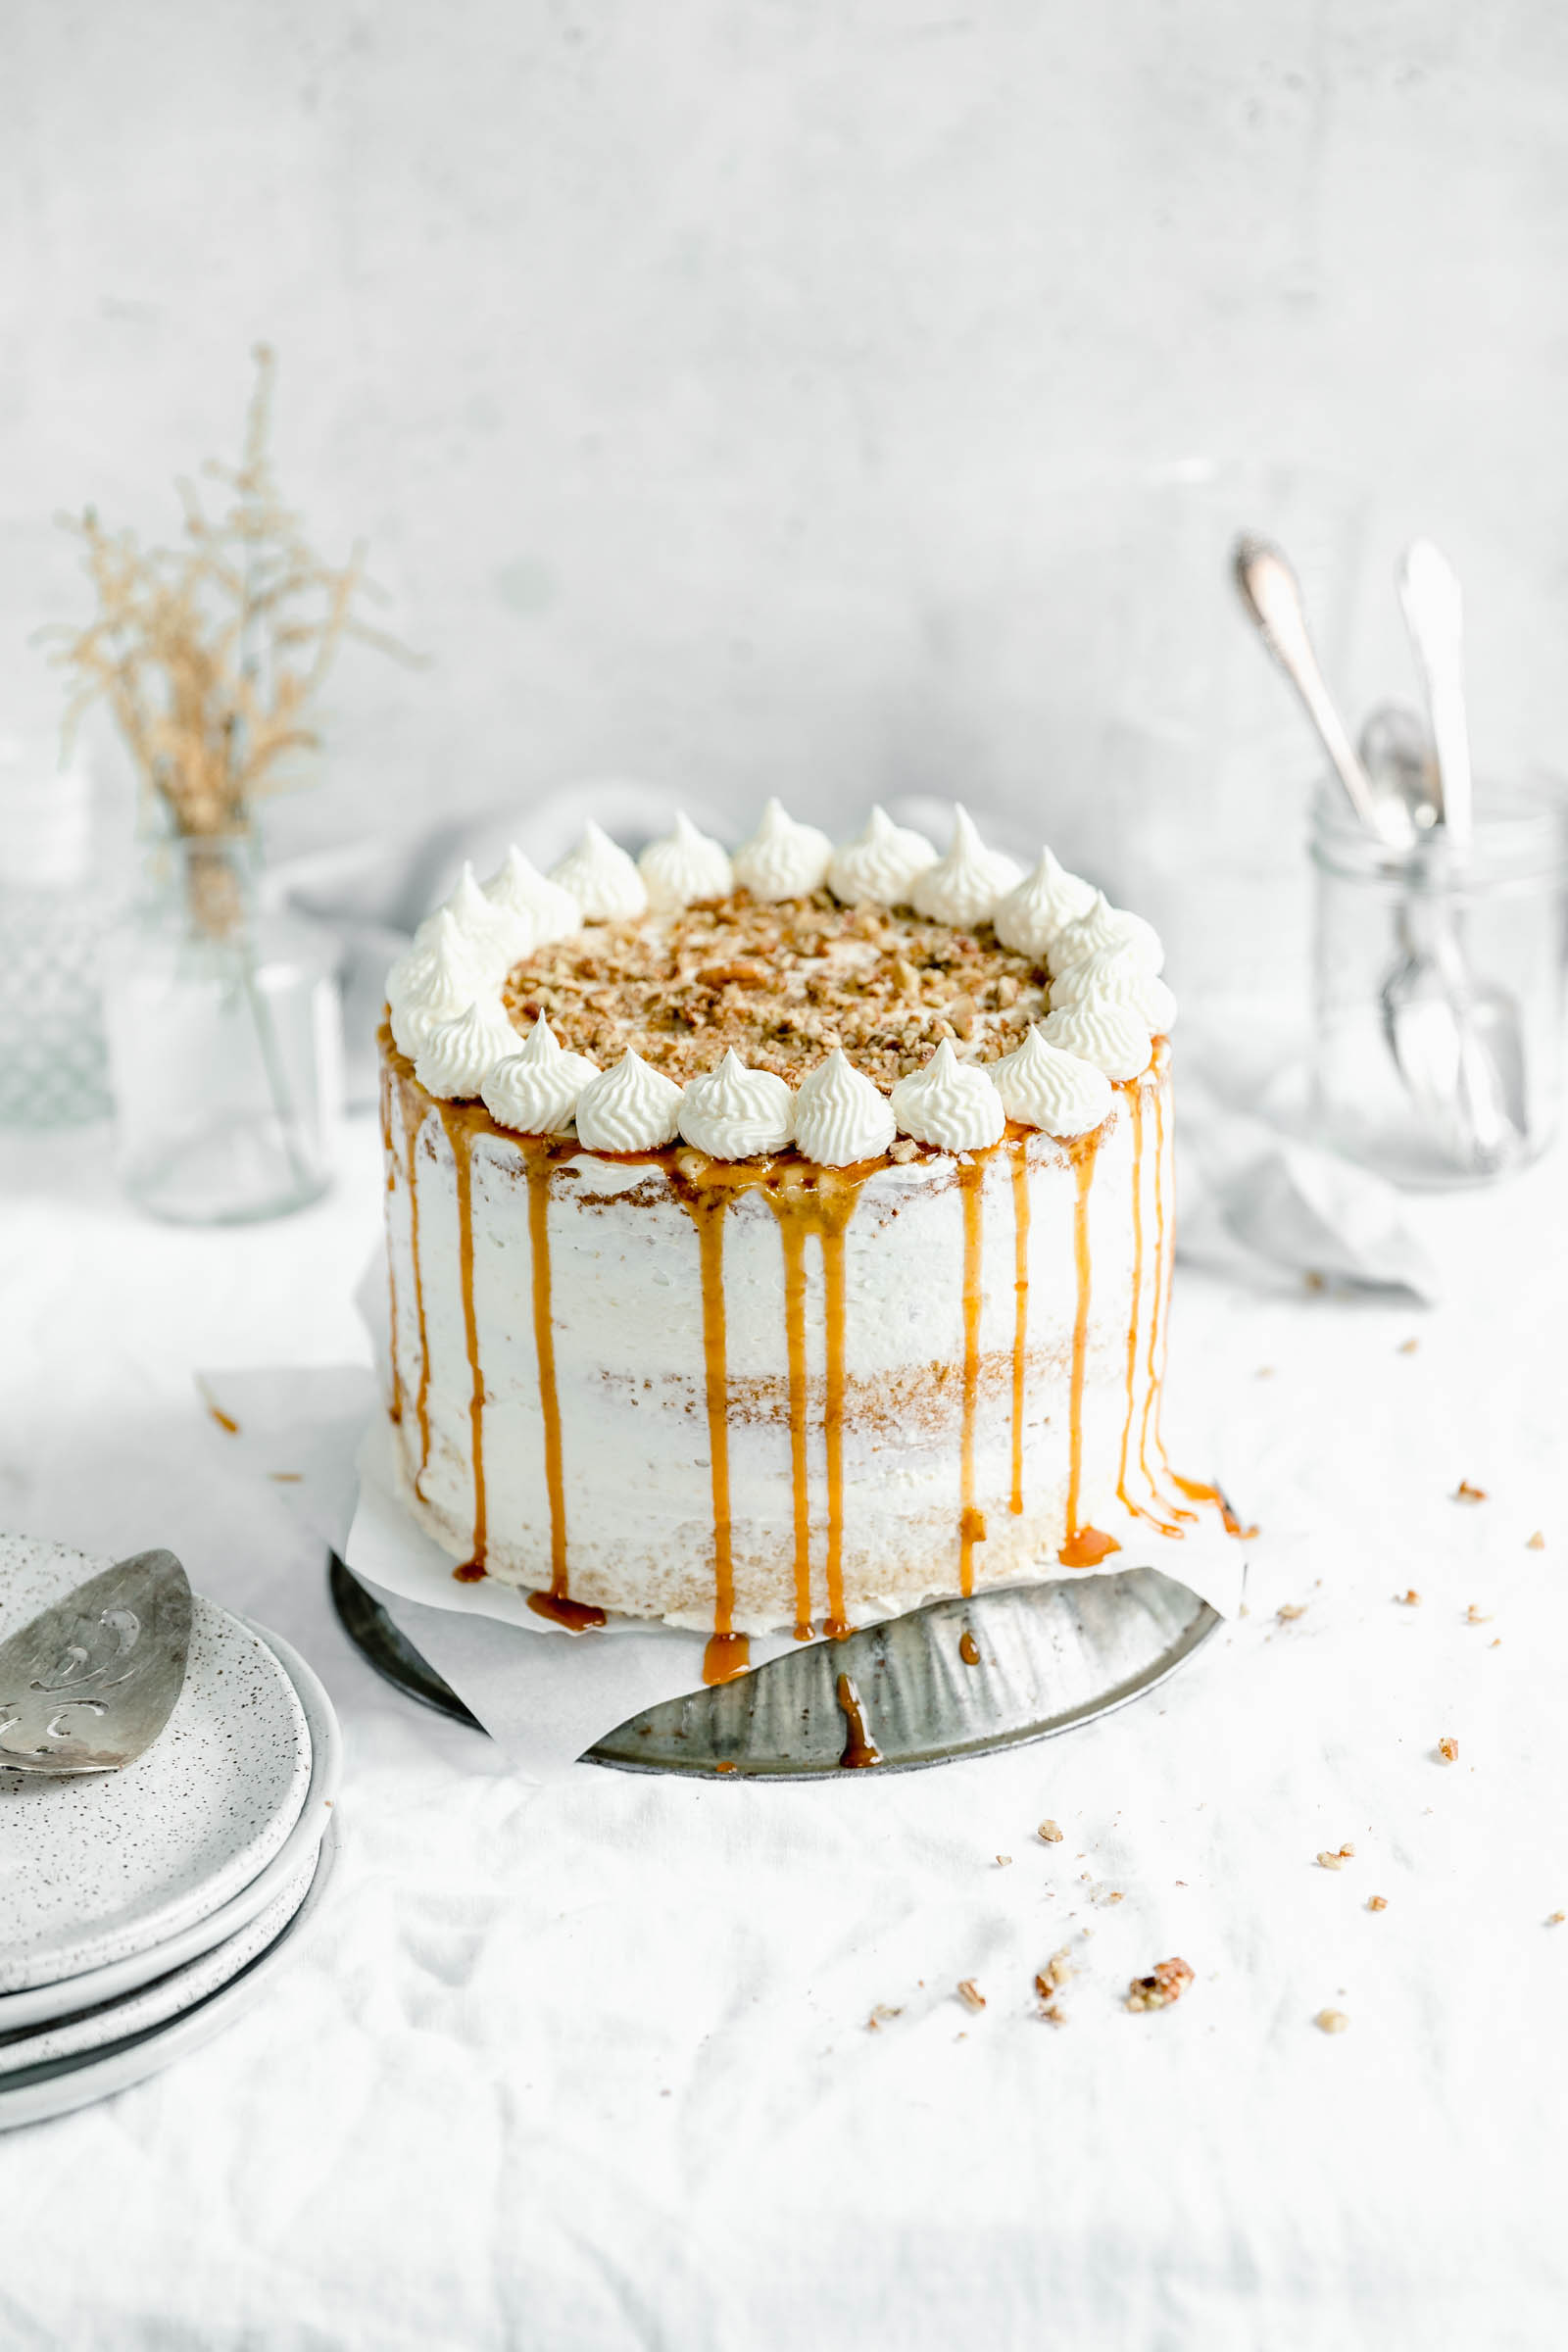 This decadent praline layer cake is the perfect centerpiece for all your Fall celebrations! Made with a moist and tender vanilla cake sandwiched together with a gooey homemade praline feeling and frosted with fluffy buttercream. Um YES. #bromabakery #pralinelayercake #foodphotography